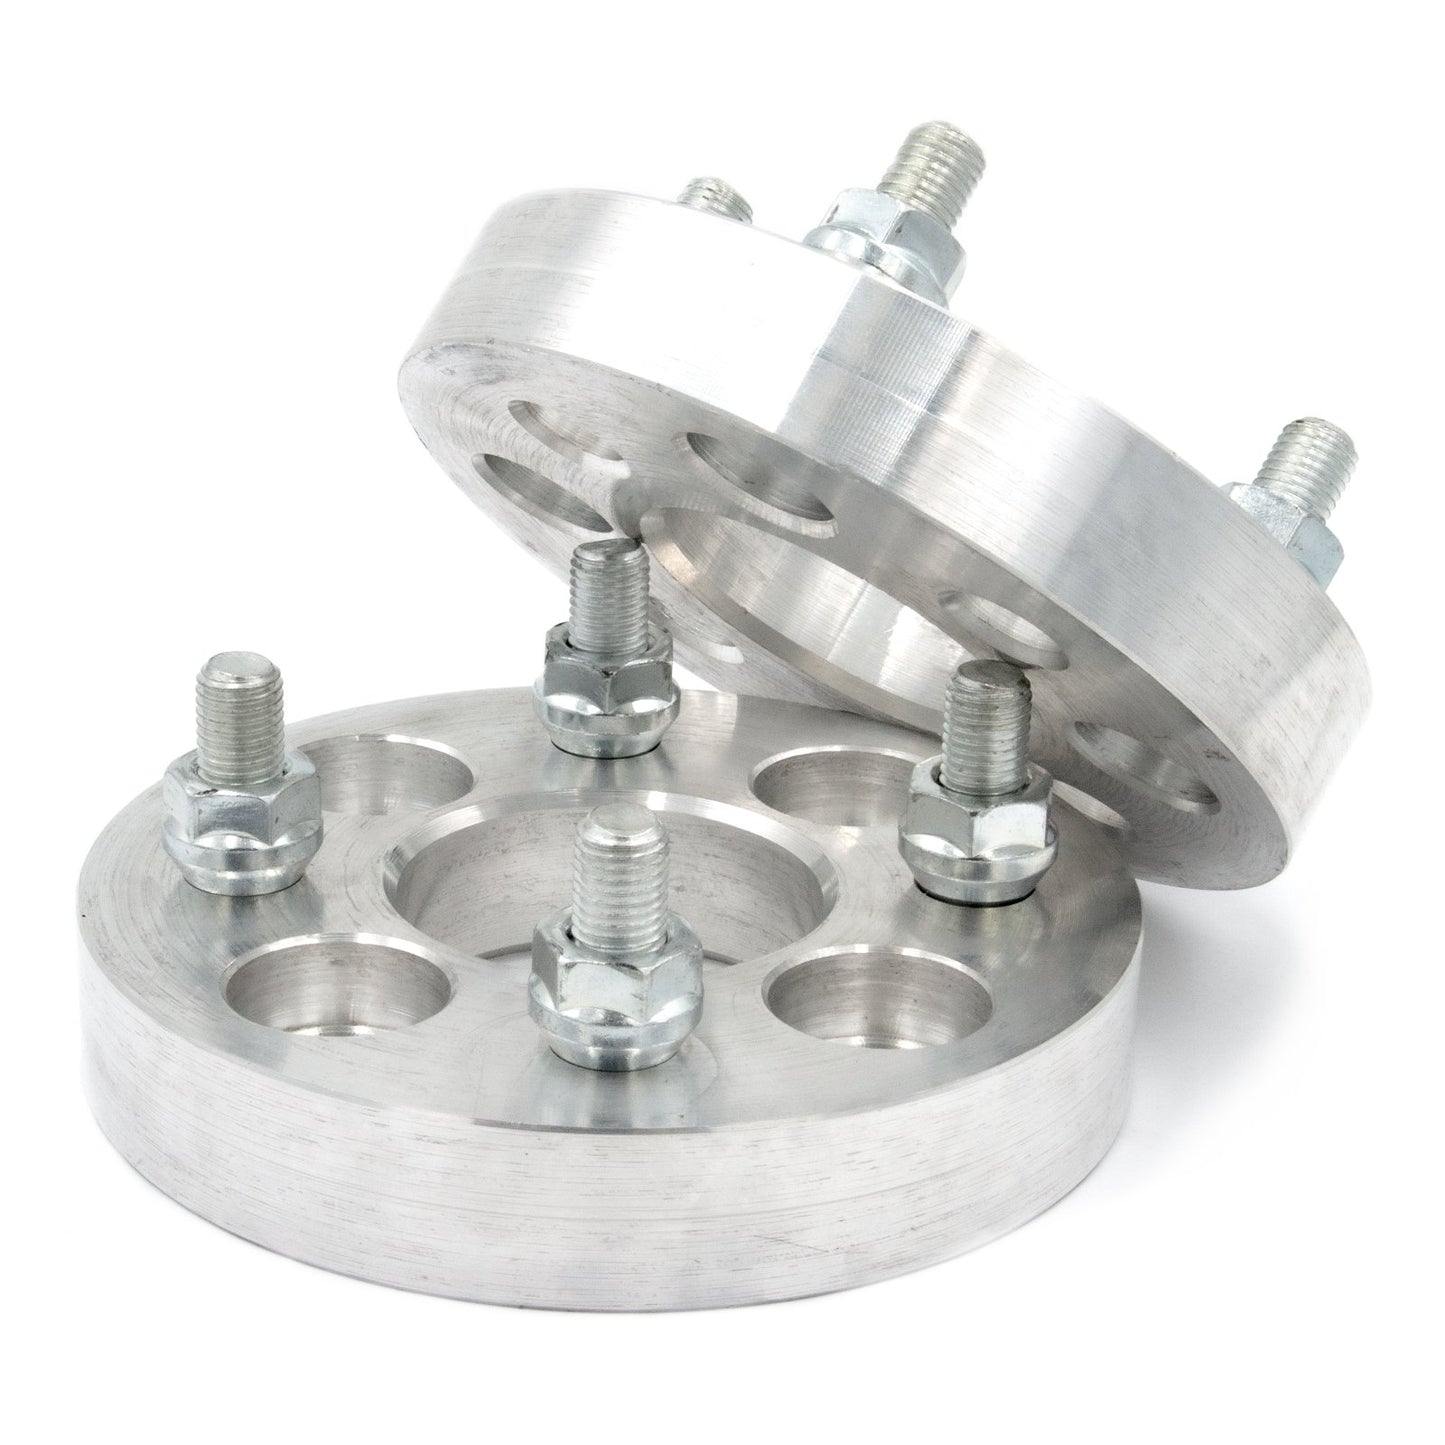 4x4" to 4x110 Wheel Spacer/Adapter - Thickness: 3/4"- 4"